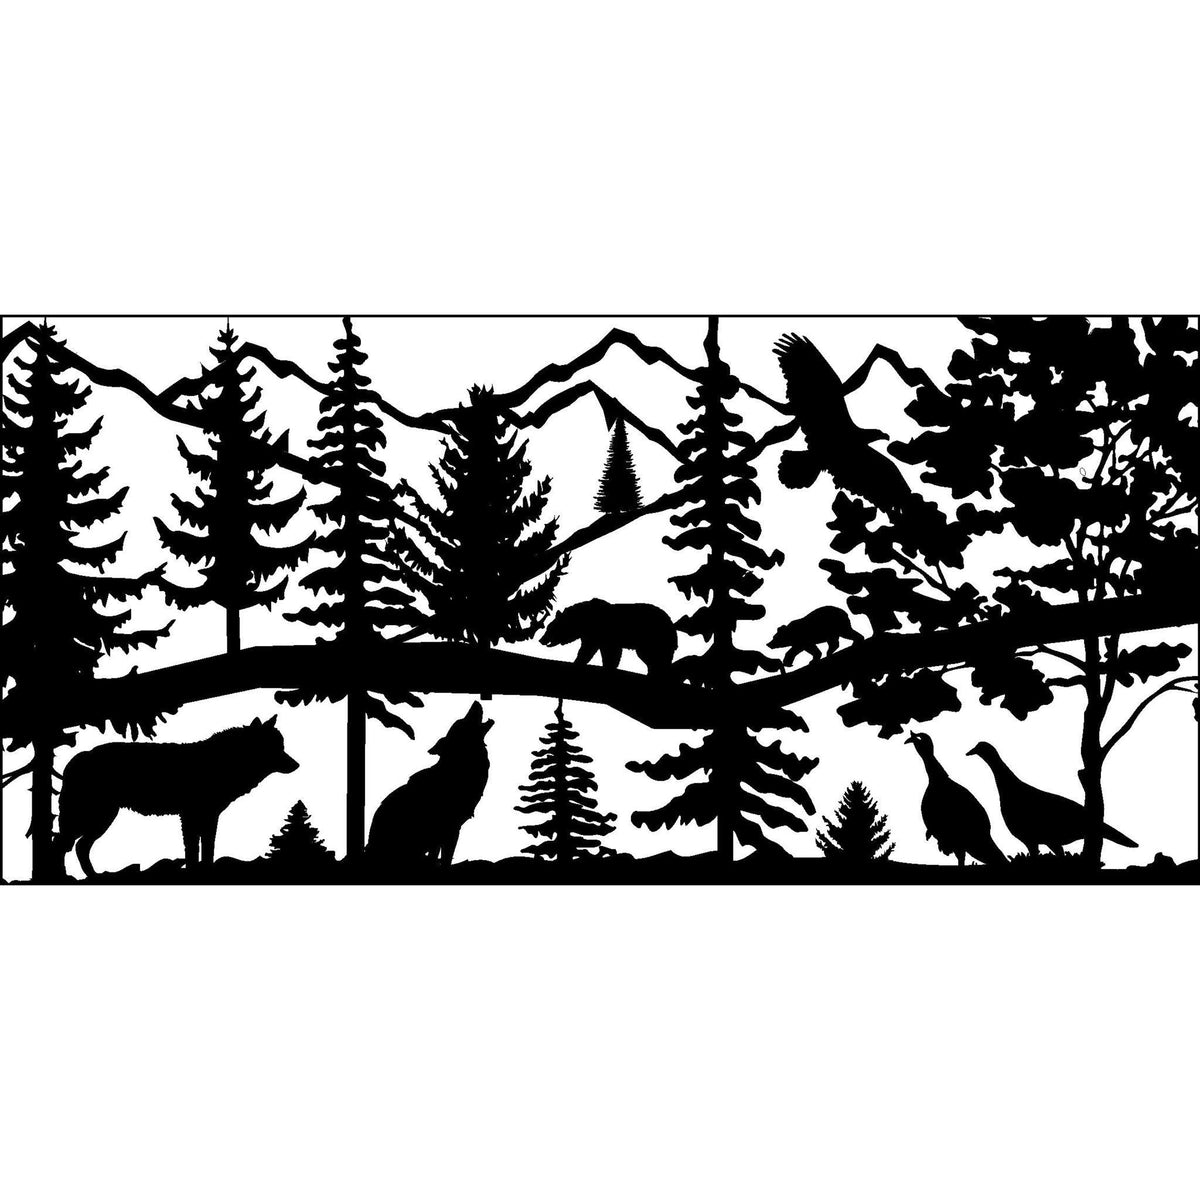 Two Wolves Two Turkeys Two Bears Eagle Hunting Metal Balcony / Staircase Panels